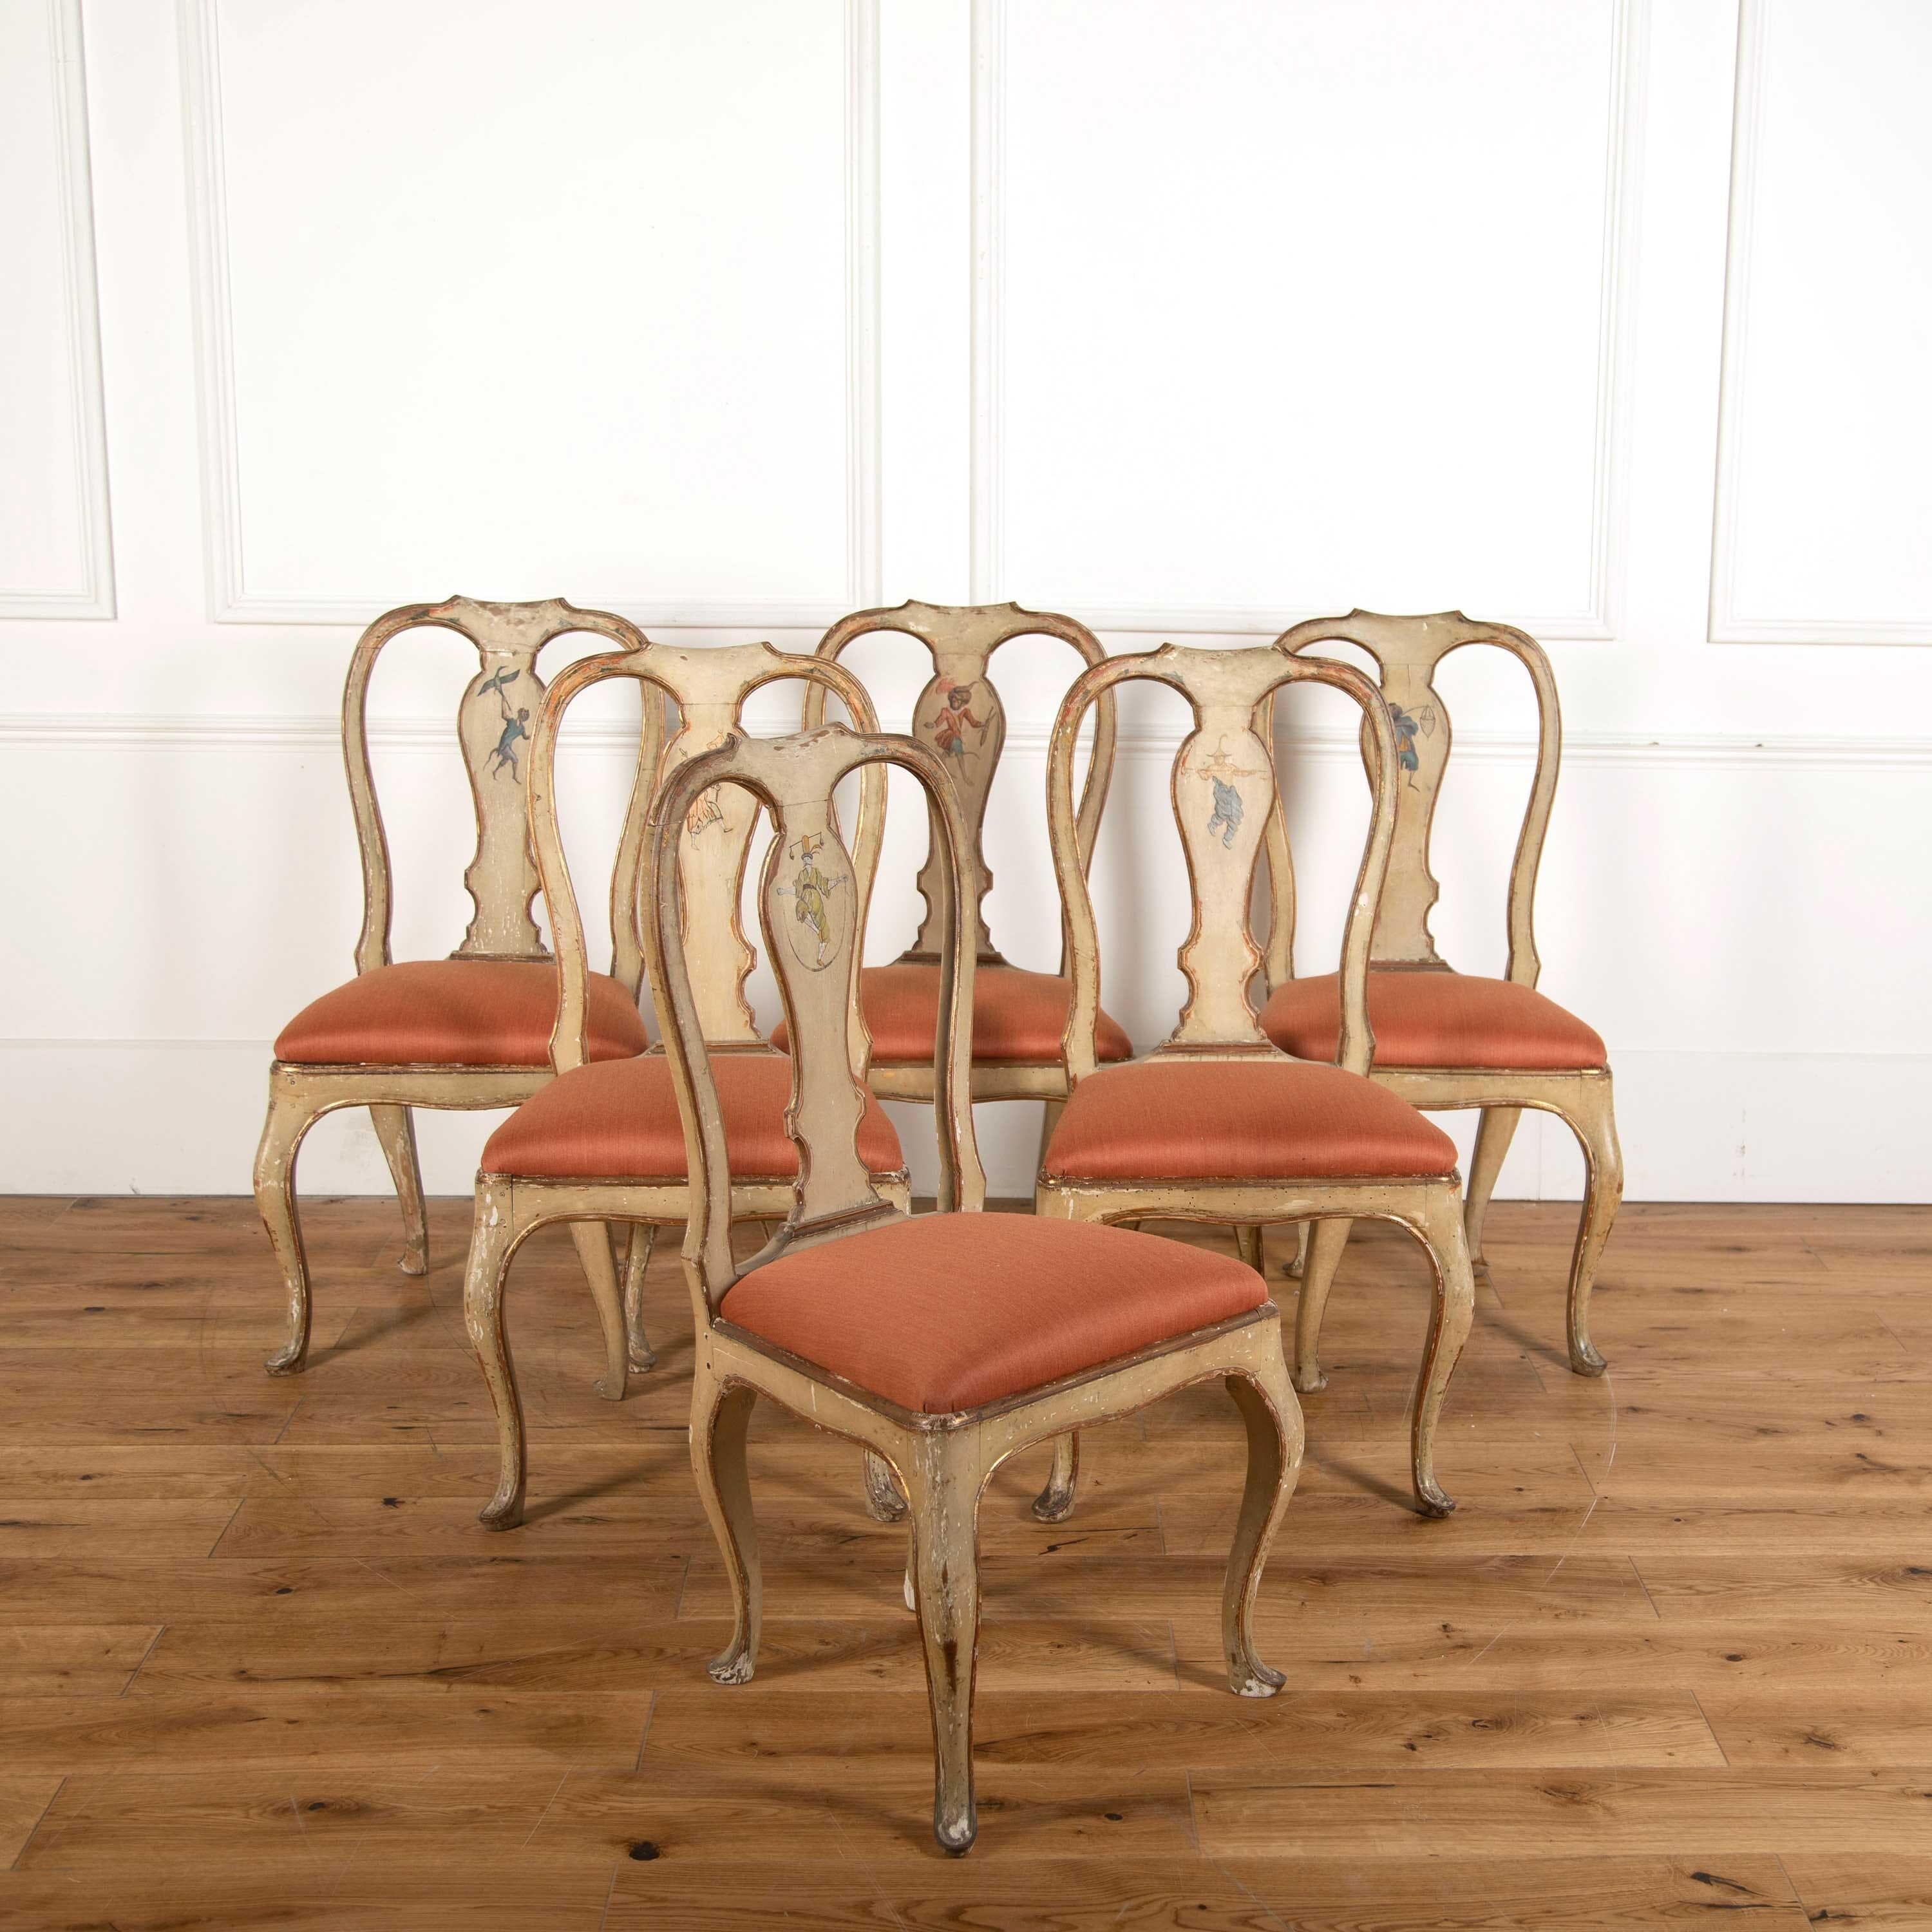 Set of six late 18th century Italian dining chairs in layers of historic paint.
       